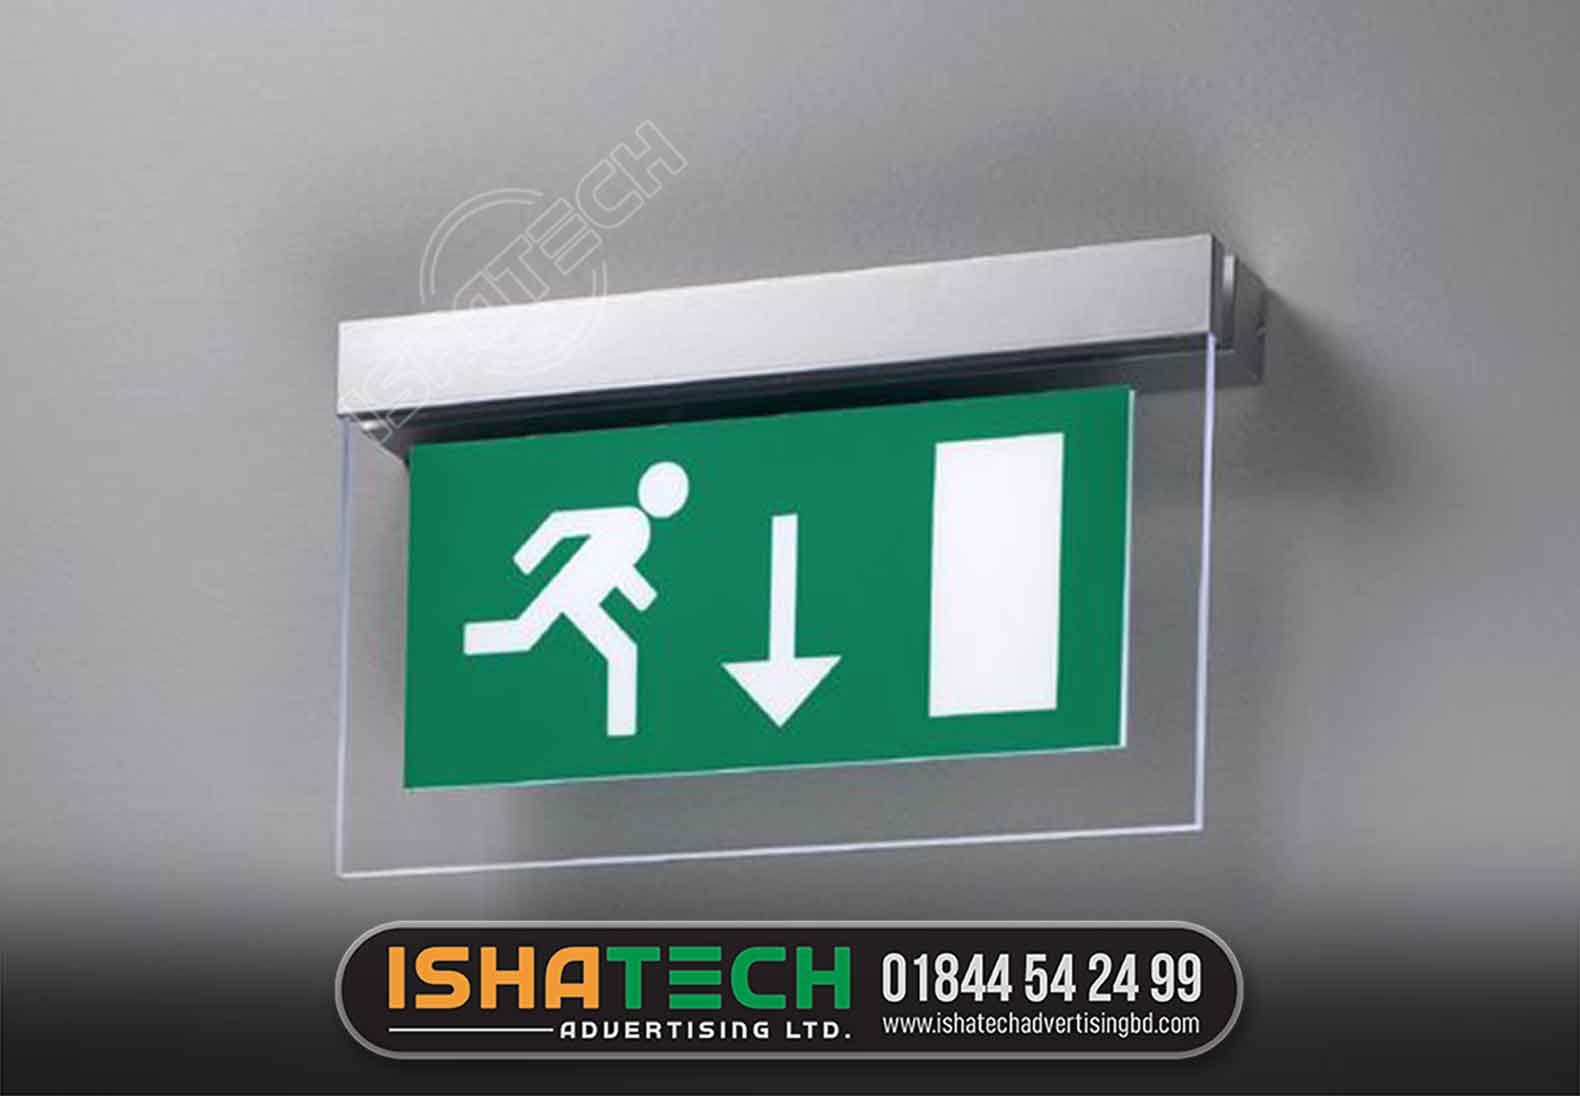 EMERGENCY EXIT SIGN, CEILING EMERGENCY LIGHT, LEVEL AWARD IN FIRE SAFETY SIGNS